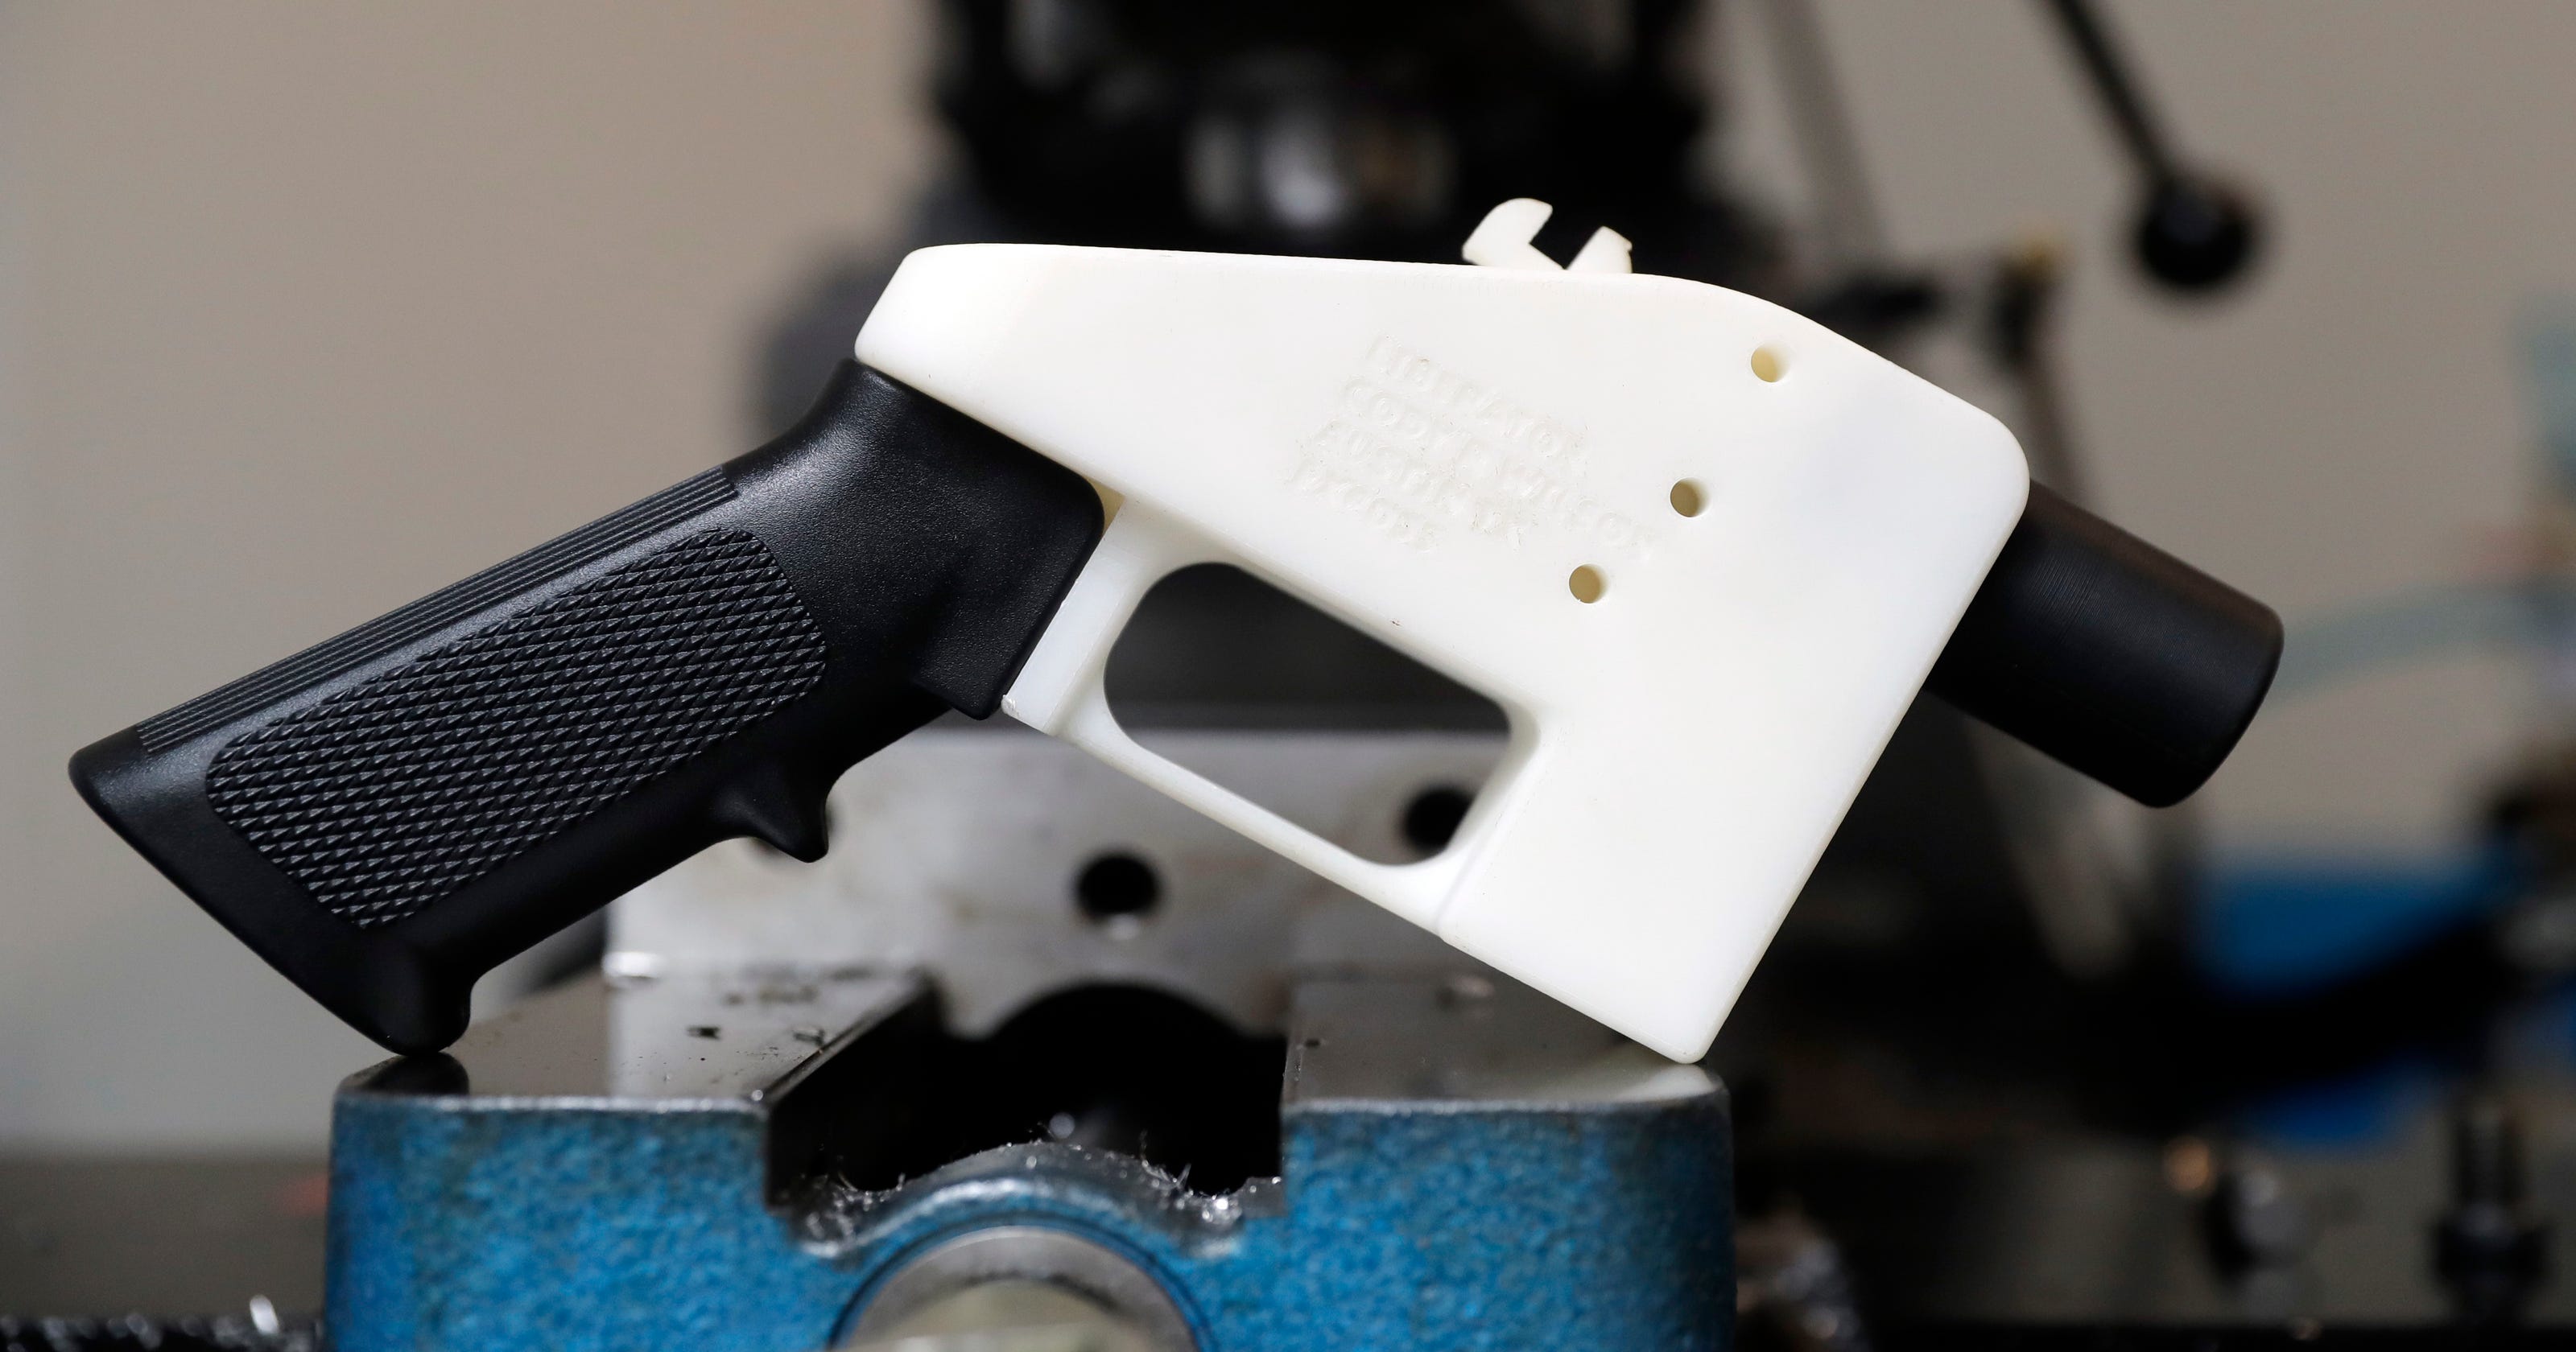 Don't panic about 3D gun printing. Yet. - 636691655397065054 3Dguns.ourview